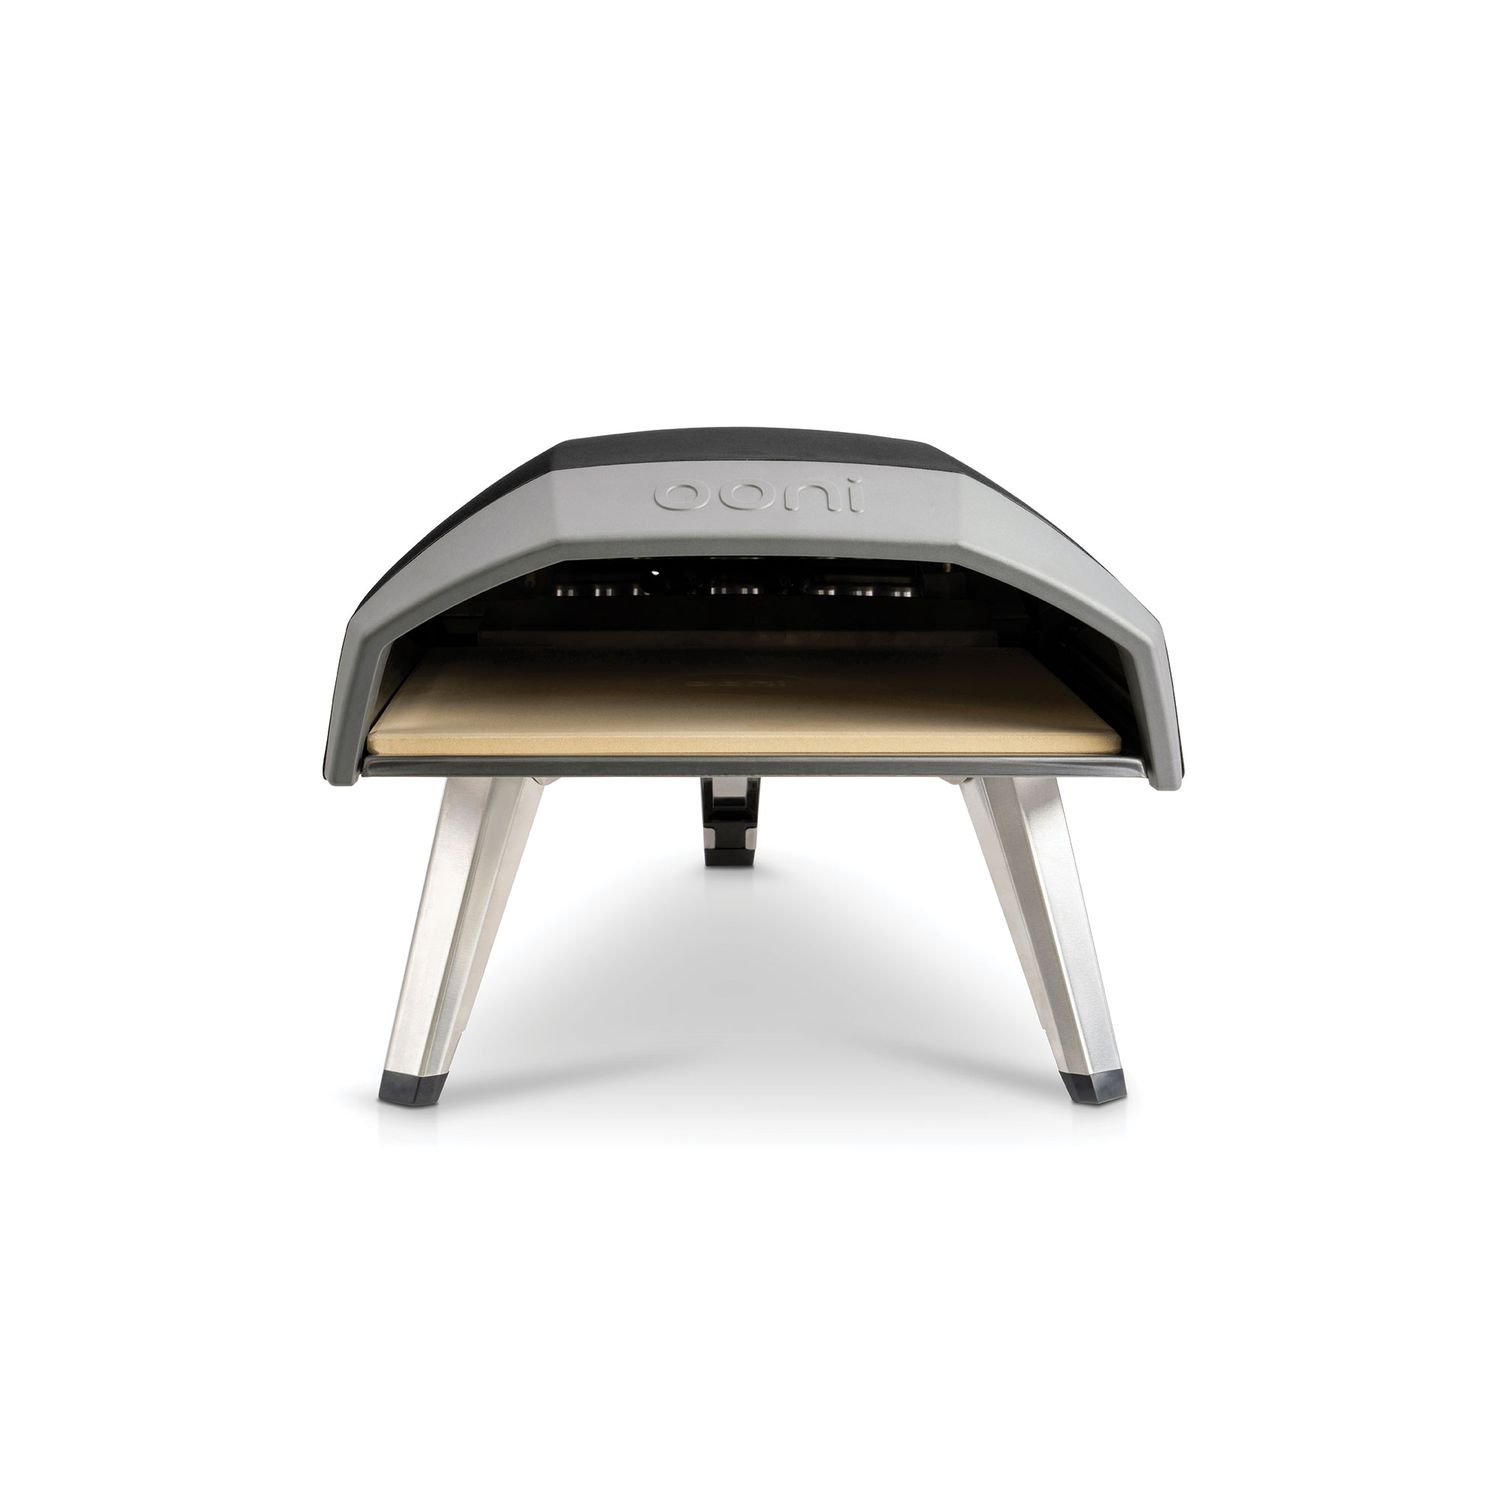 Ooni Koda Pizza Oven with a white background